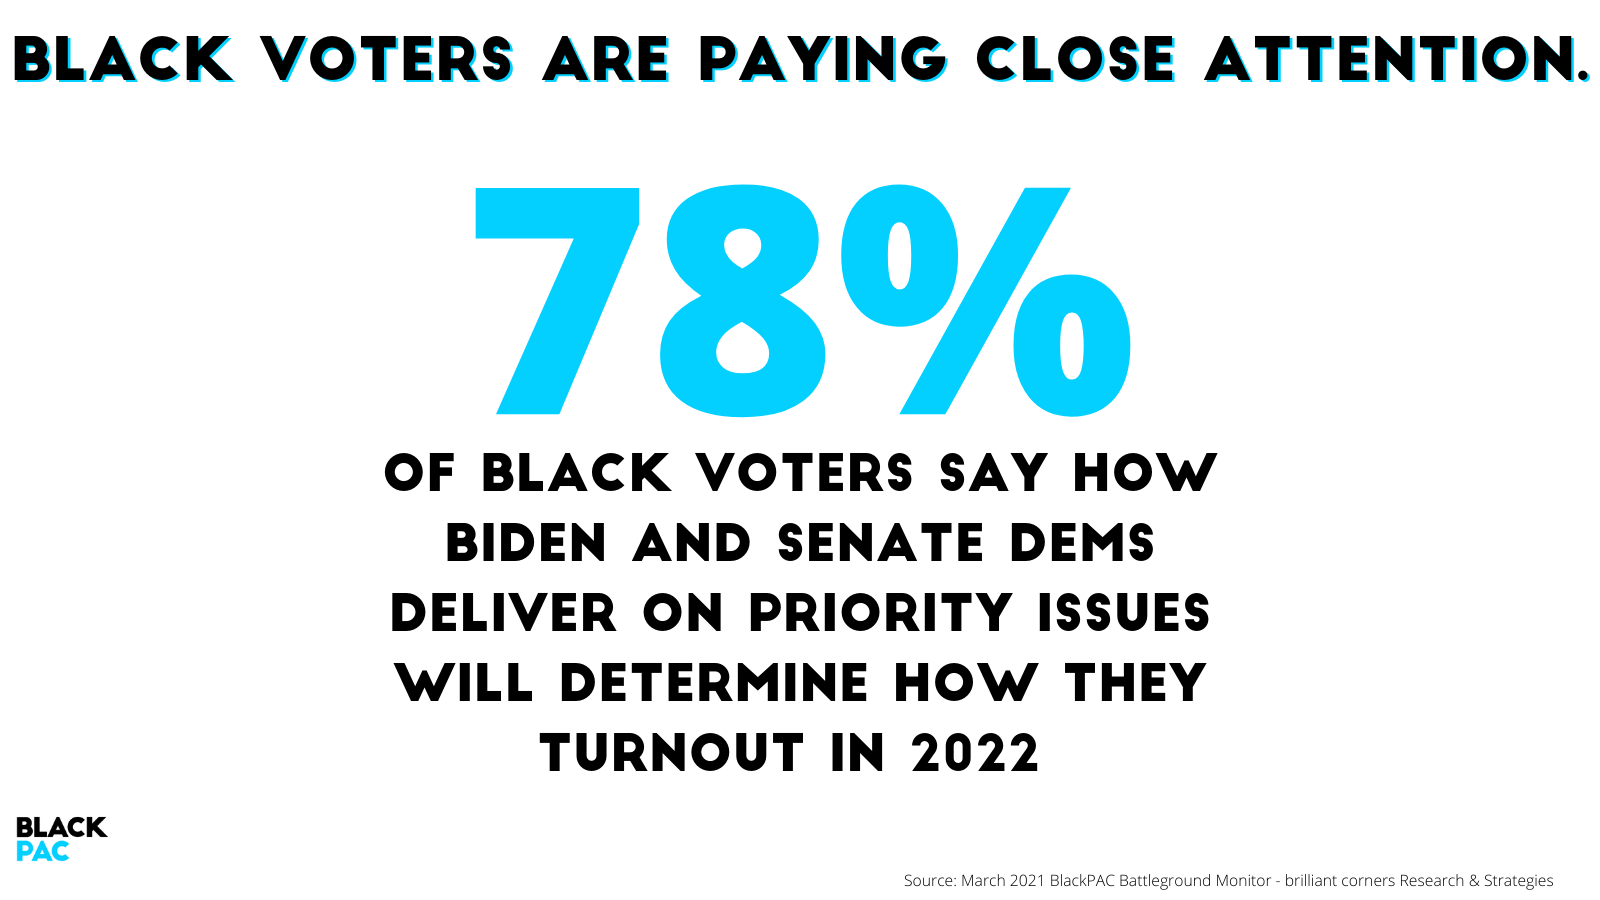 BlackPAC Survey Shows Black Voters Regaining Confidence with the Direction of the Country, but Reveals Warning Signs for Democrats Ahead of Midterms